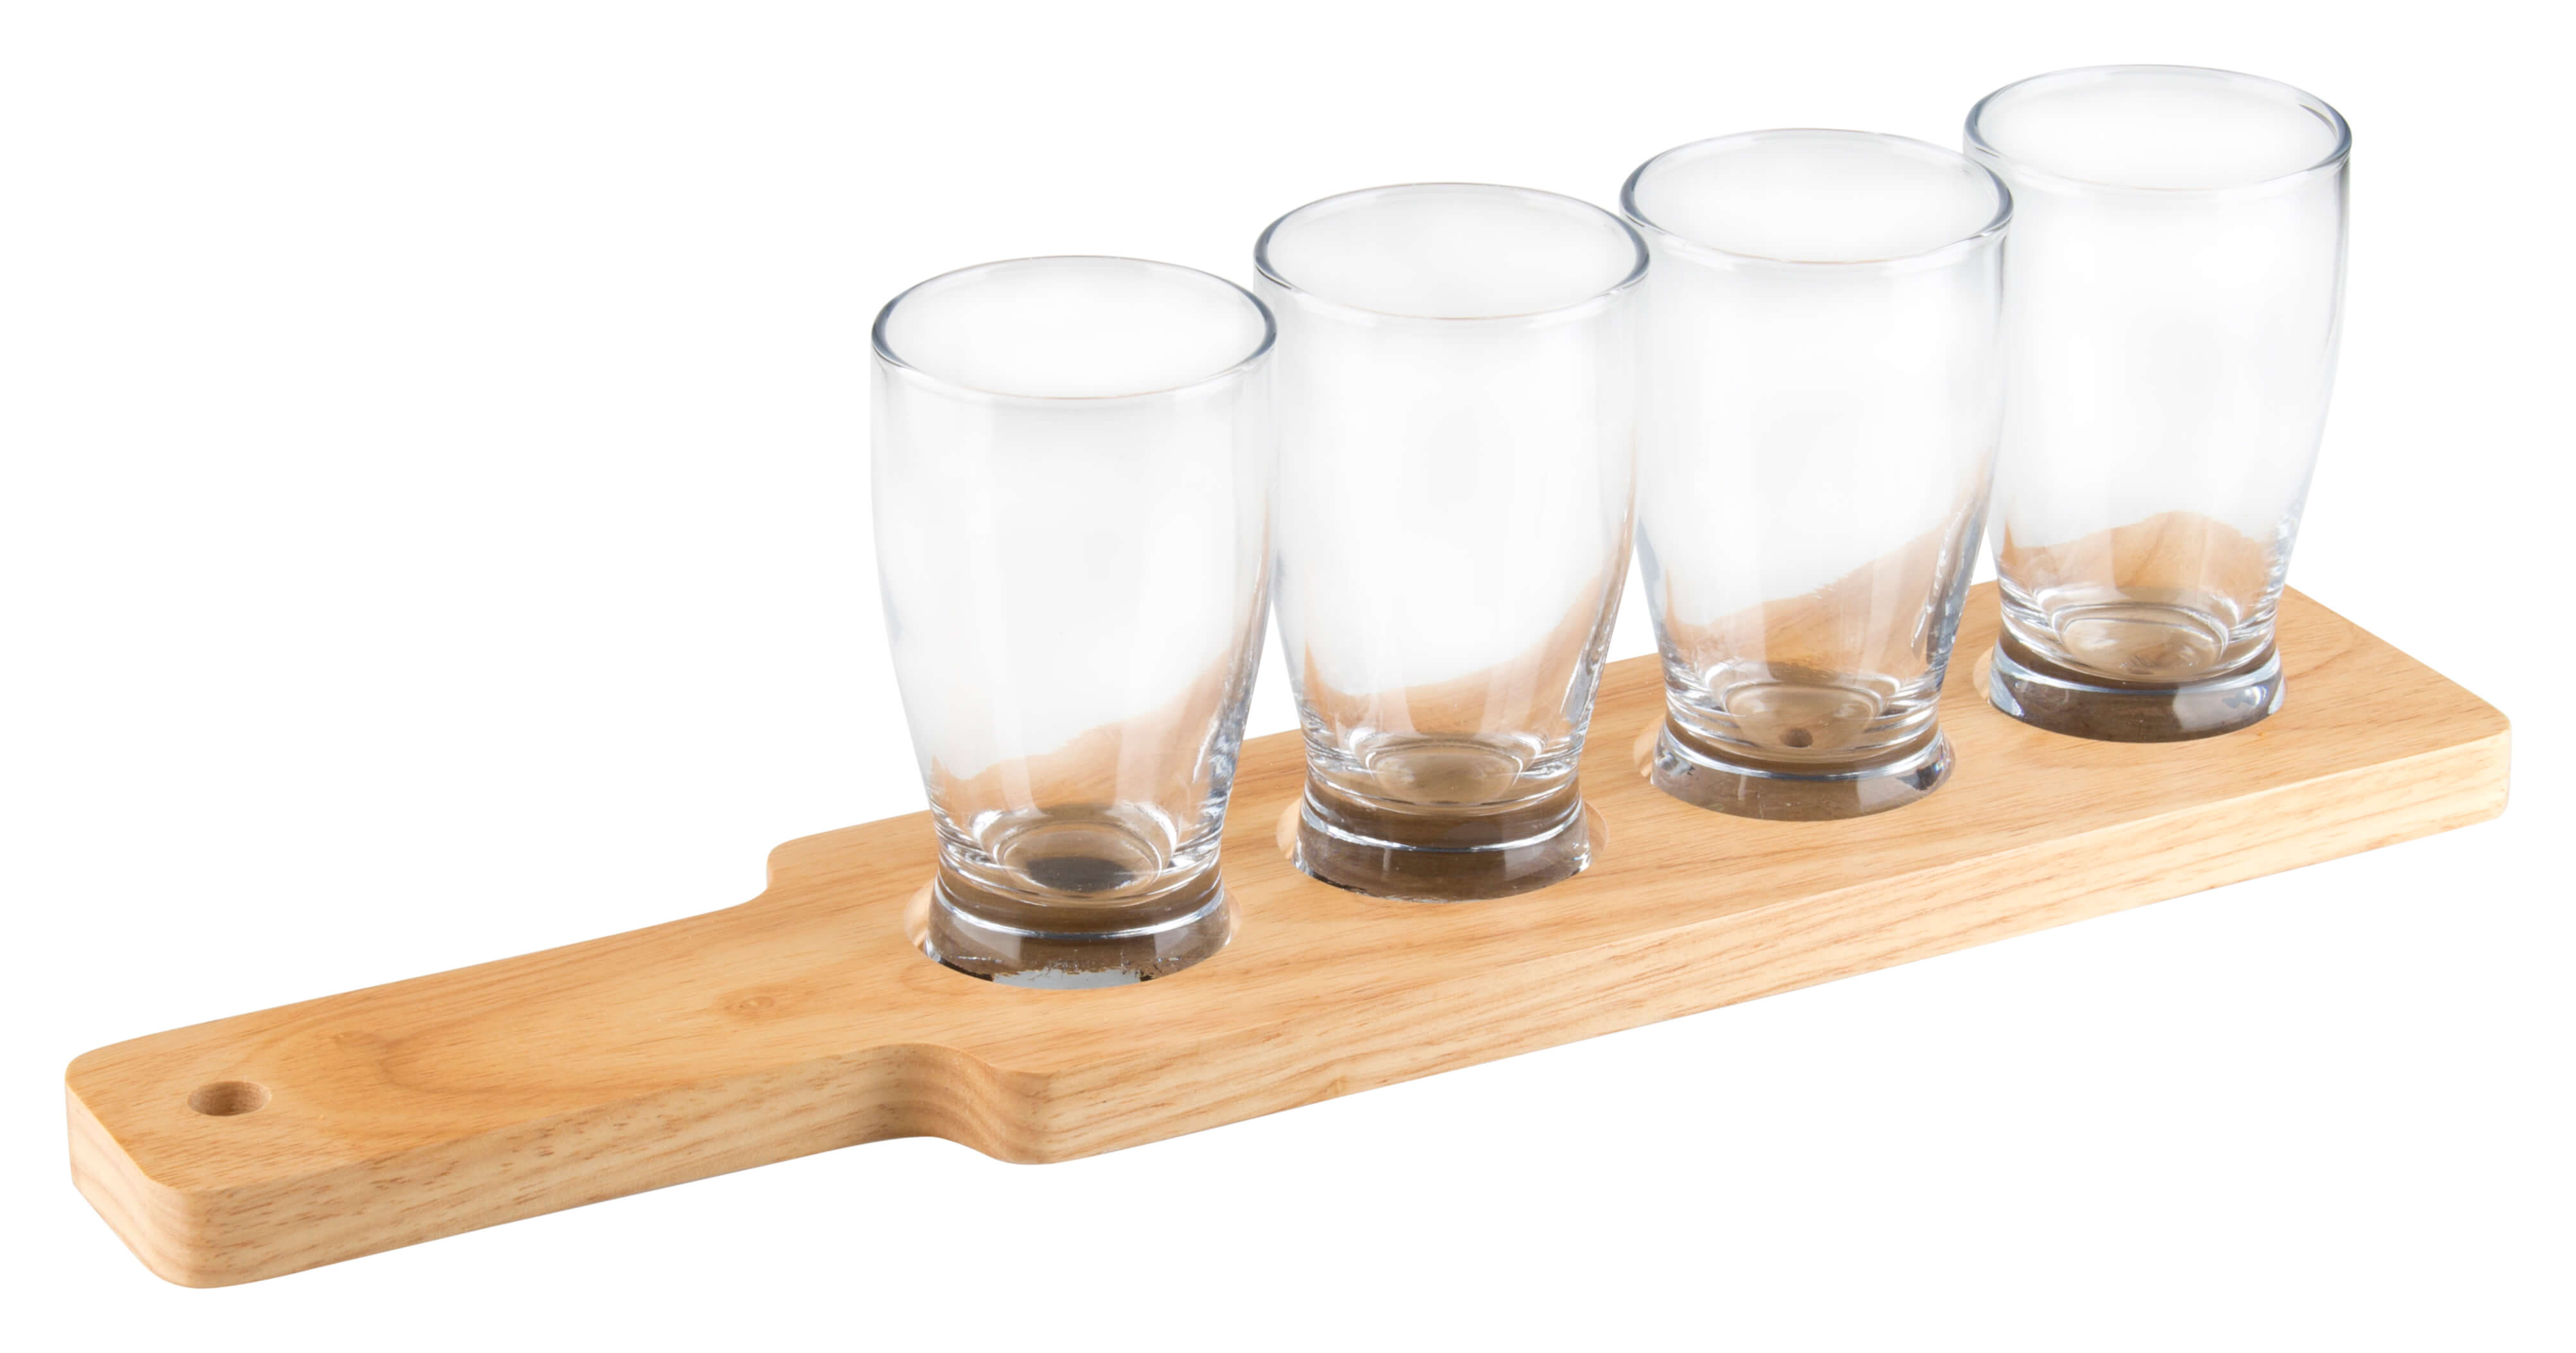 Craft Beer Tasting-Set with Paddle - 4 x 144ml